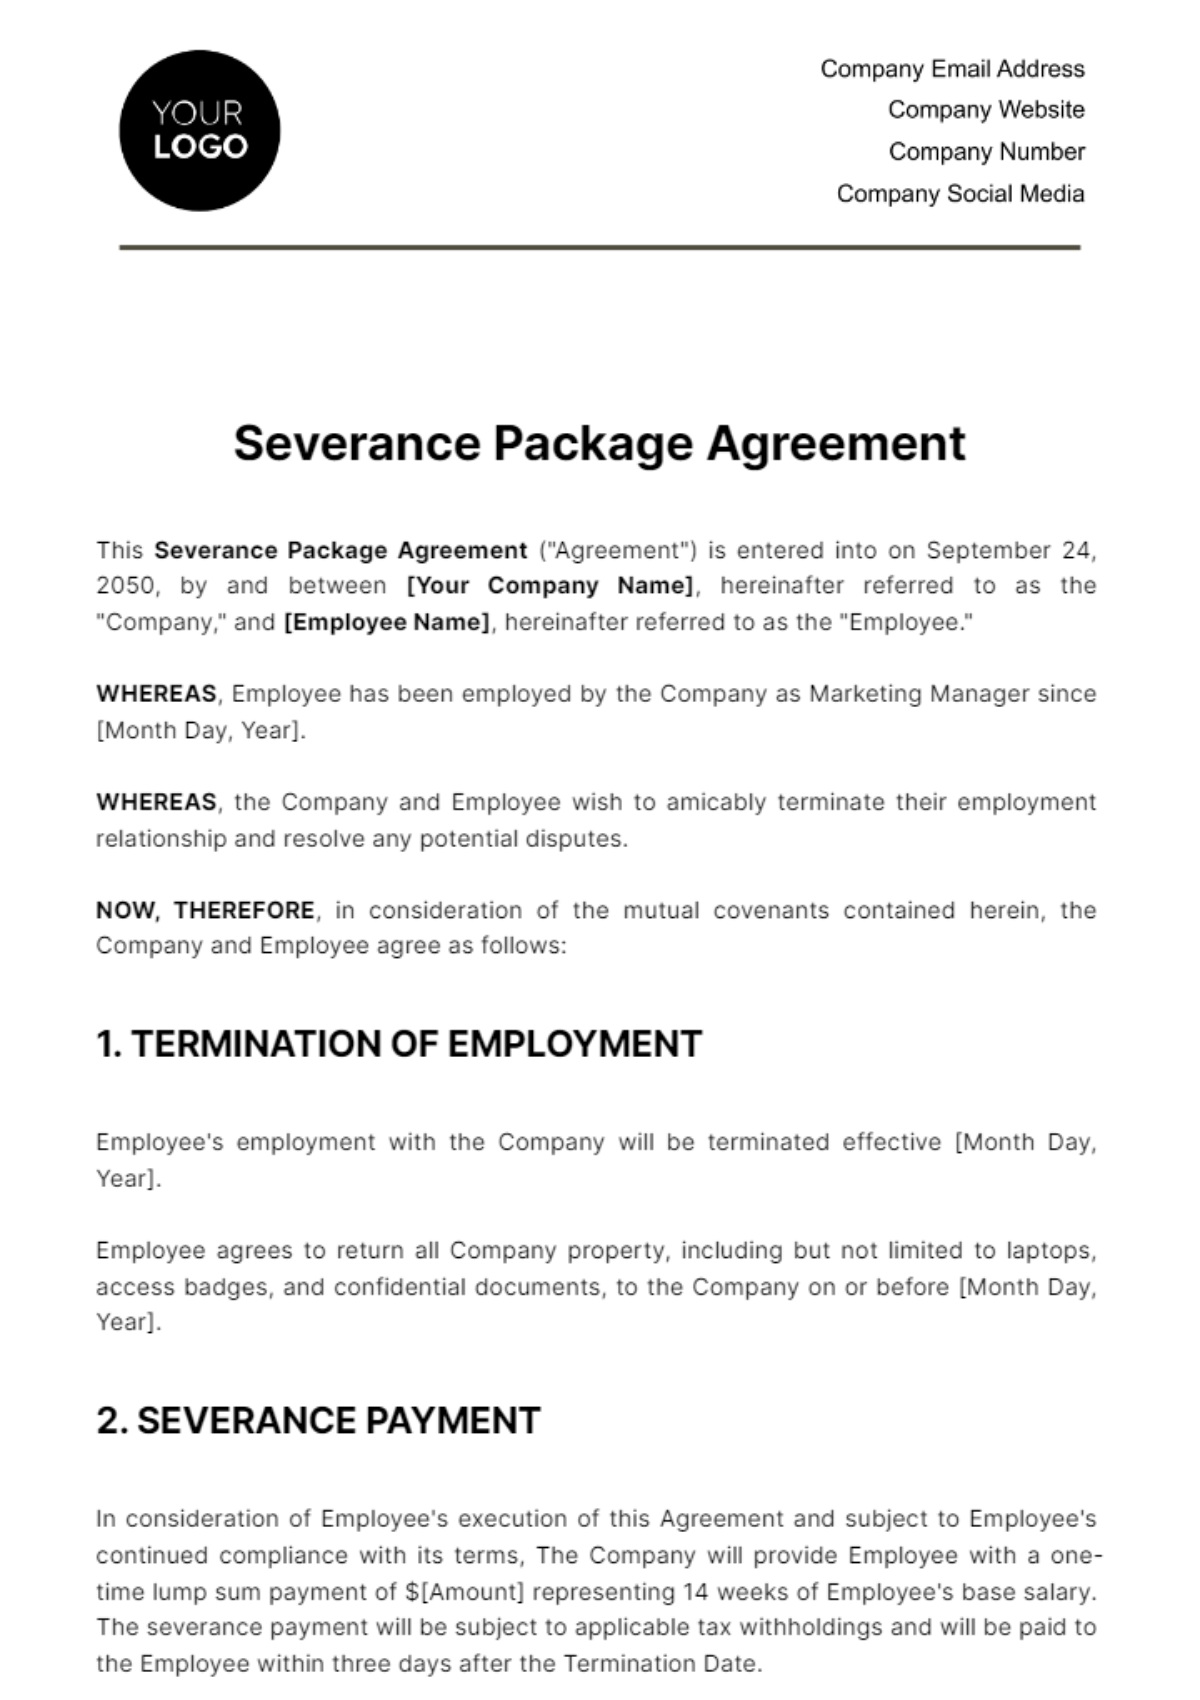 Free Severance Package Agreement HR Template